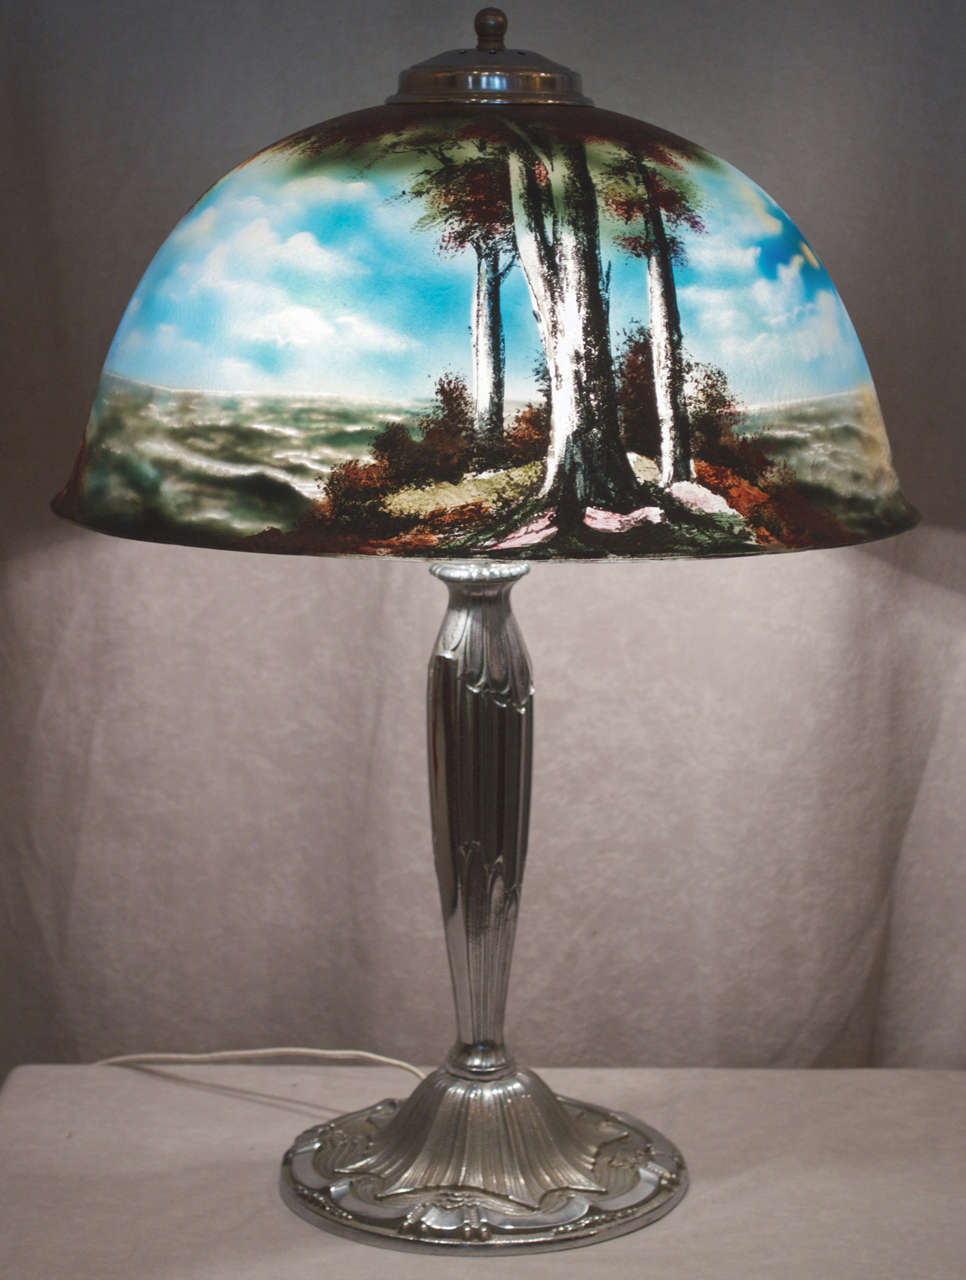 This crisp-scenic is done in the standard tradition of Pittsburg lamps.  They were known for painting their lamps on the outside as well as the inside.  This gives the lamp extra depth, color, and clarity.  A beautiful example of this American style